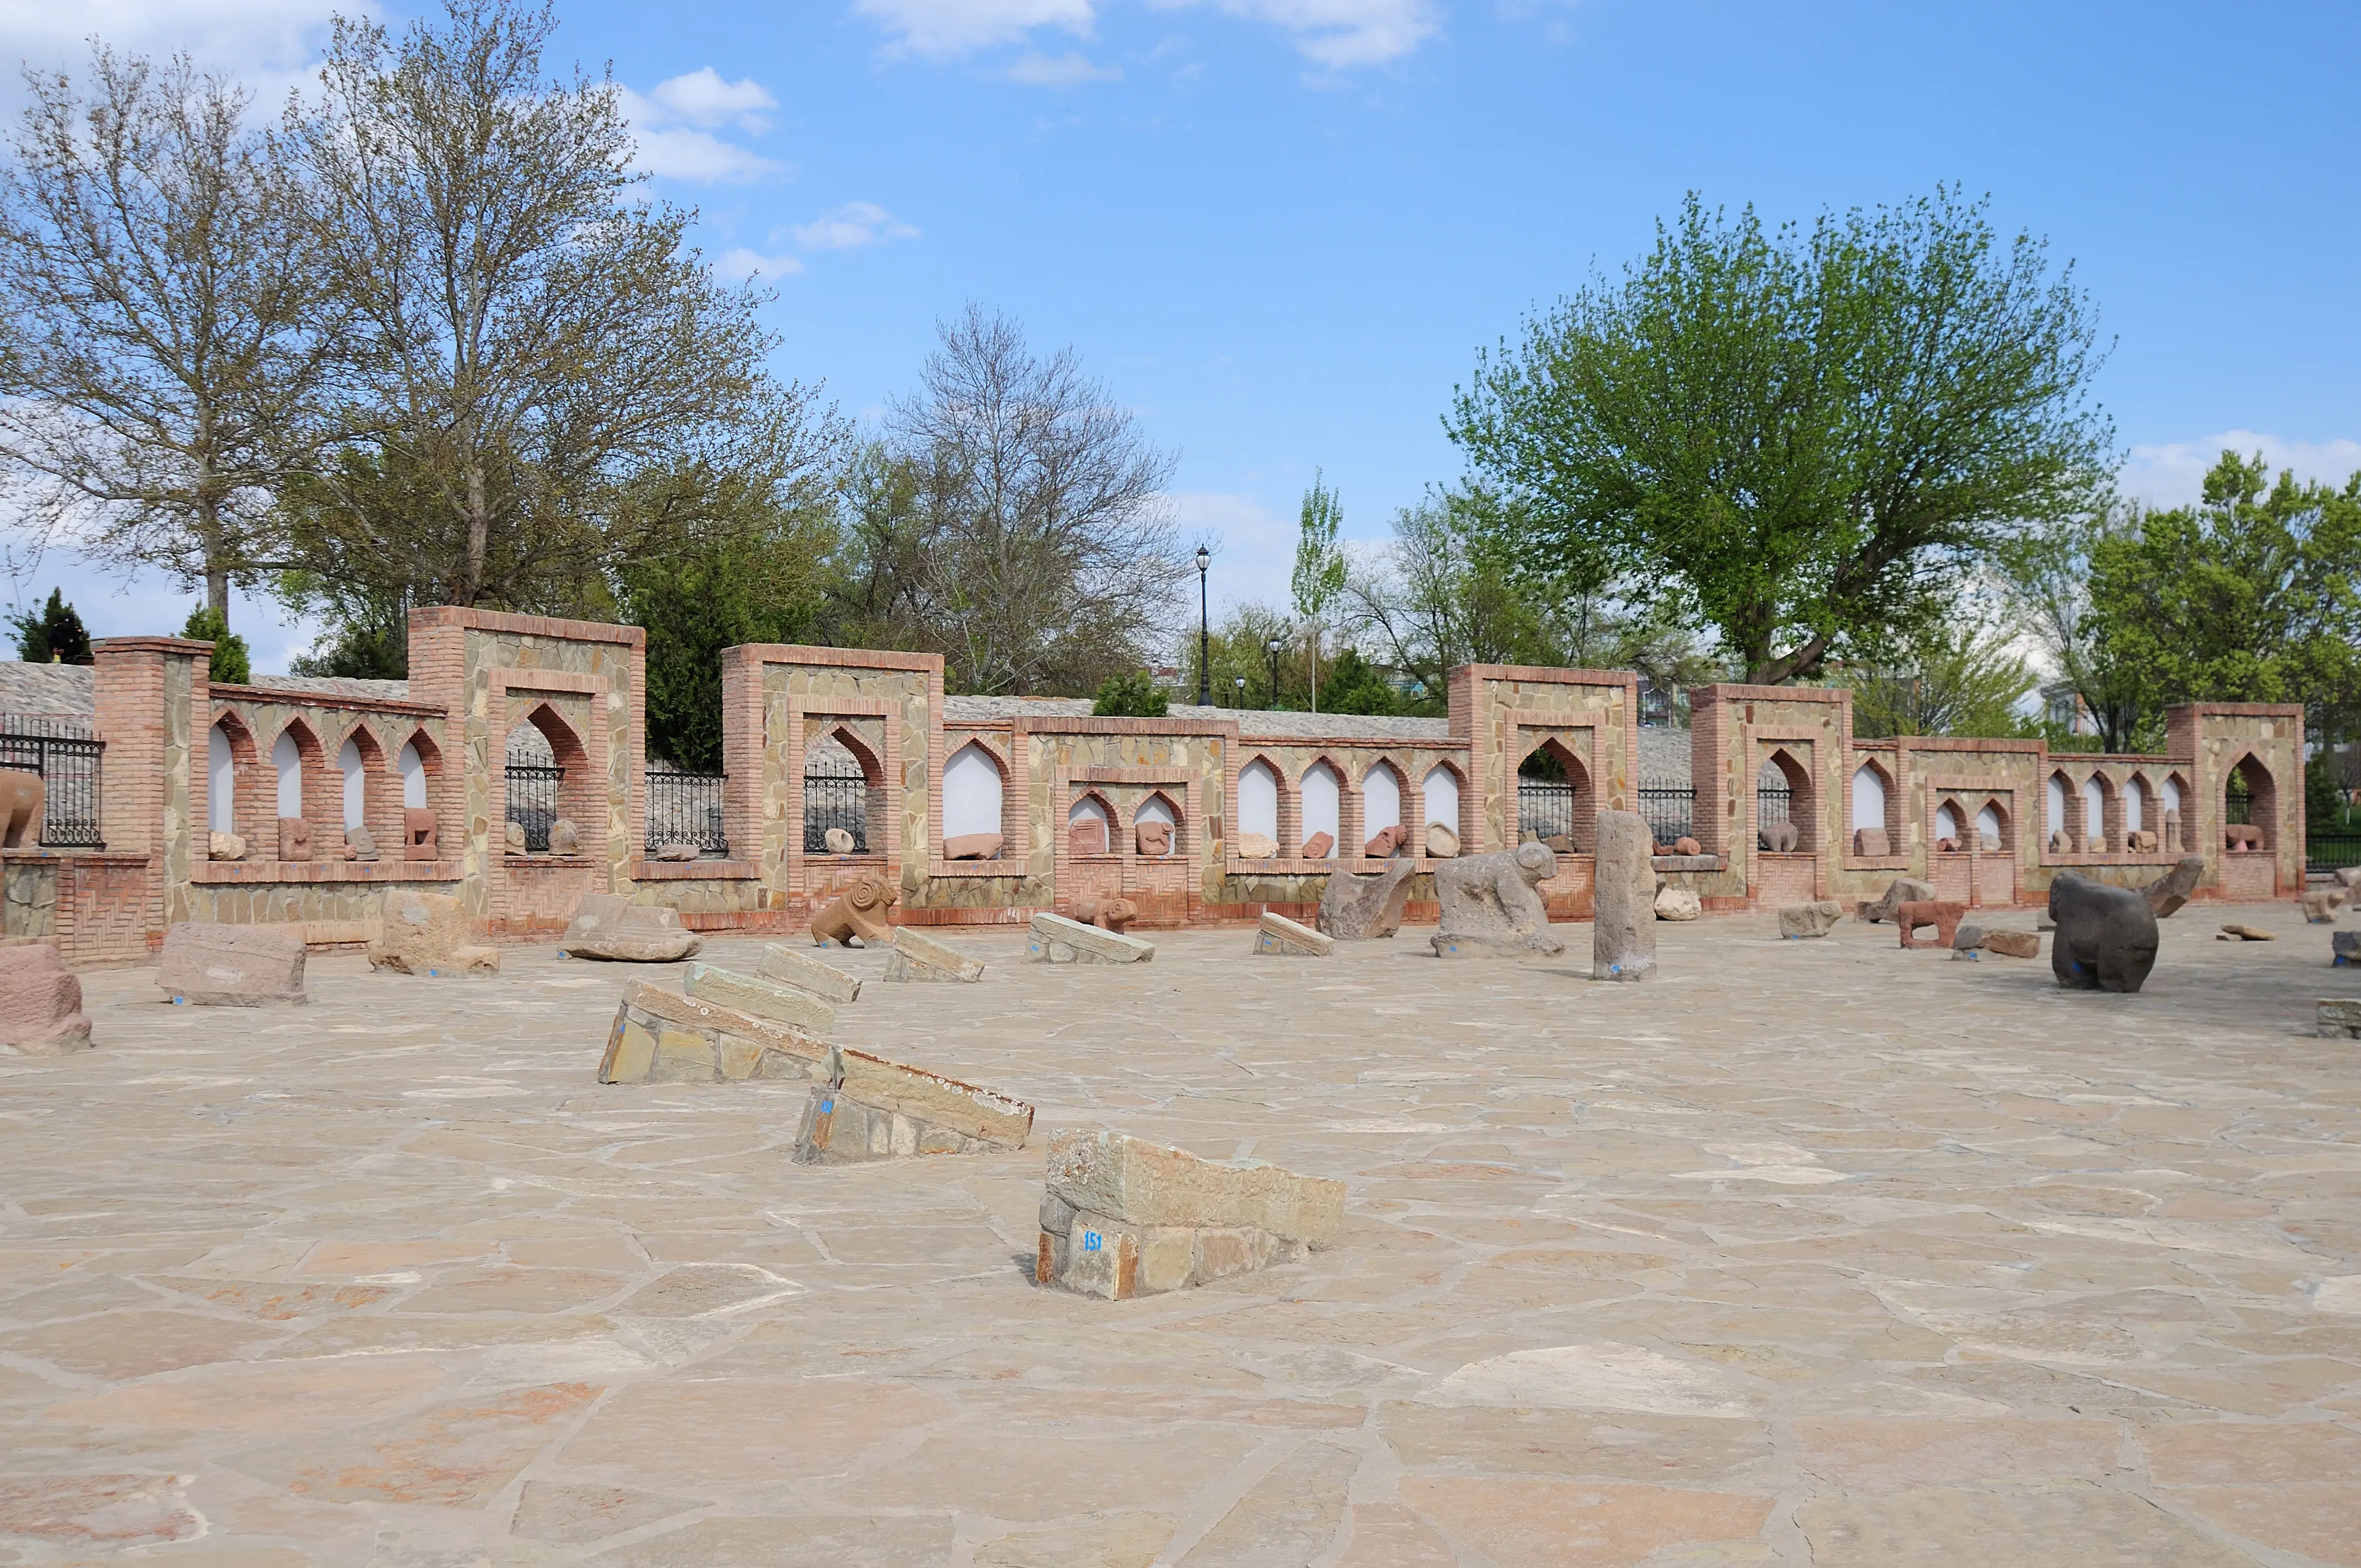 1-Day Local Family Sightseeing and Relaxation Trip in Nakhchivan